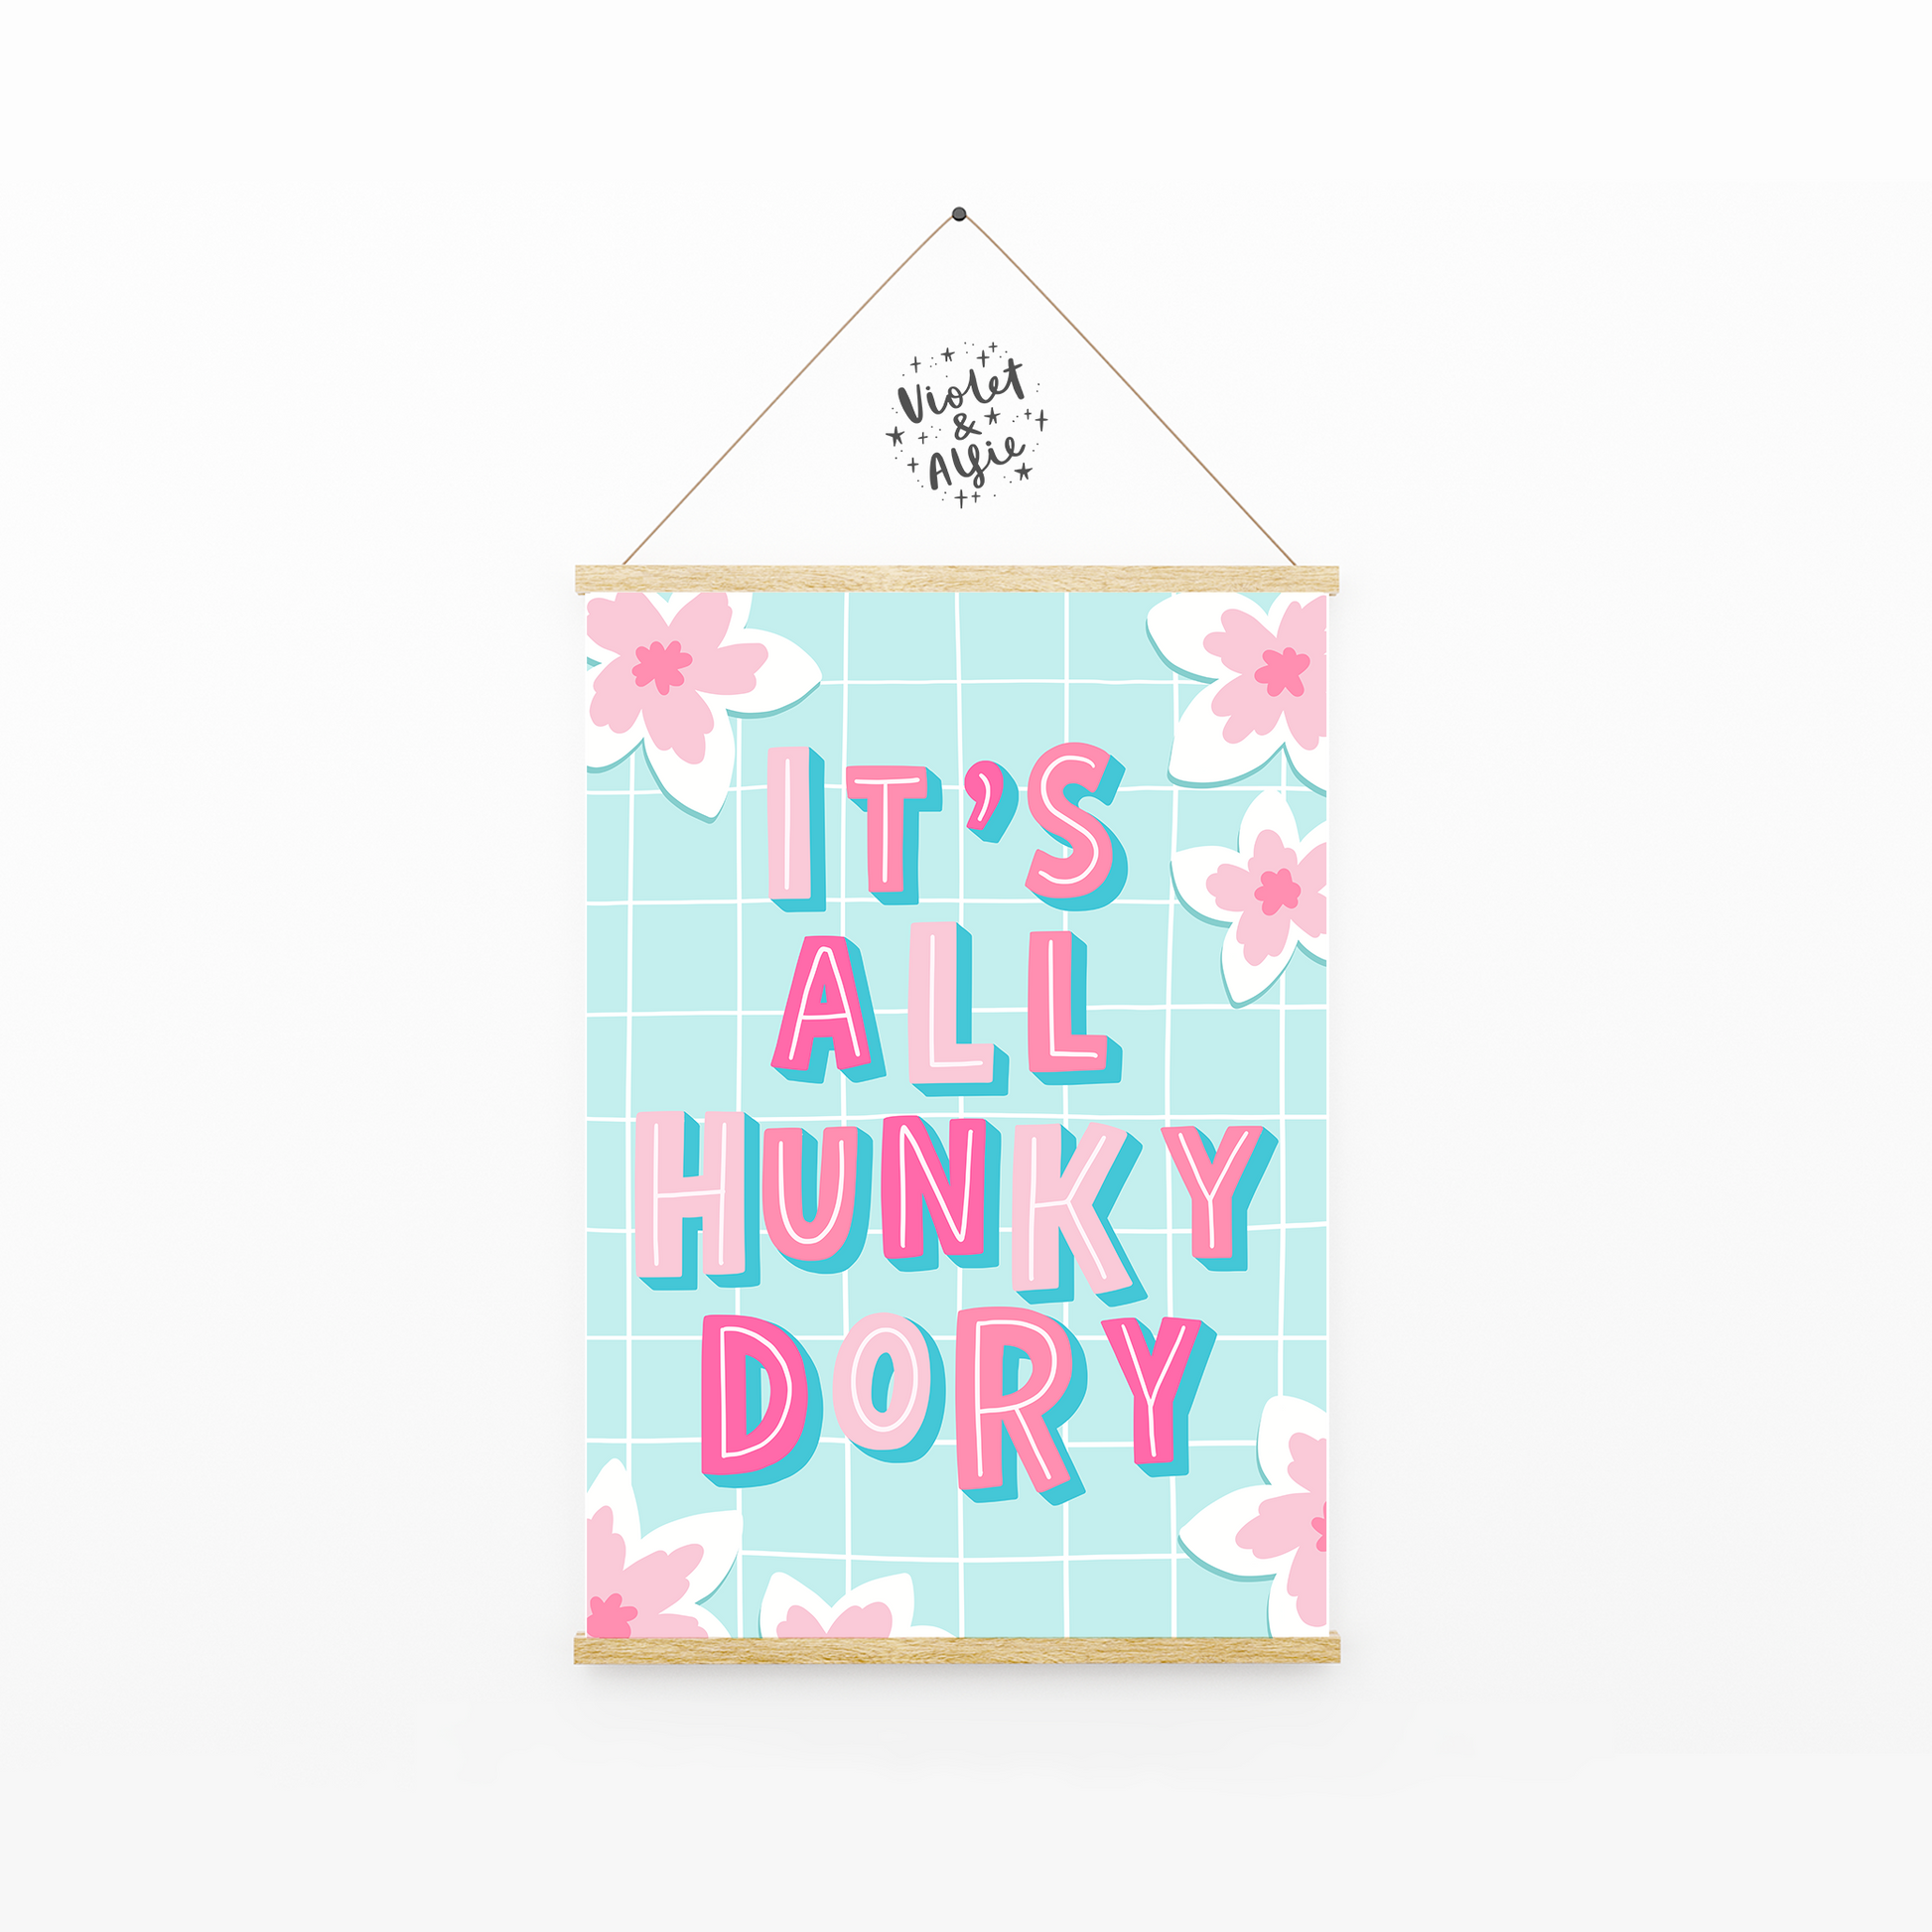 Hunky Dory print, bold colourful wall art, pastel room decor, happy prints, positivity quote, floral illustration, typographic poster, gallery wall prints